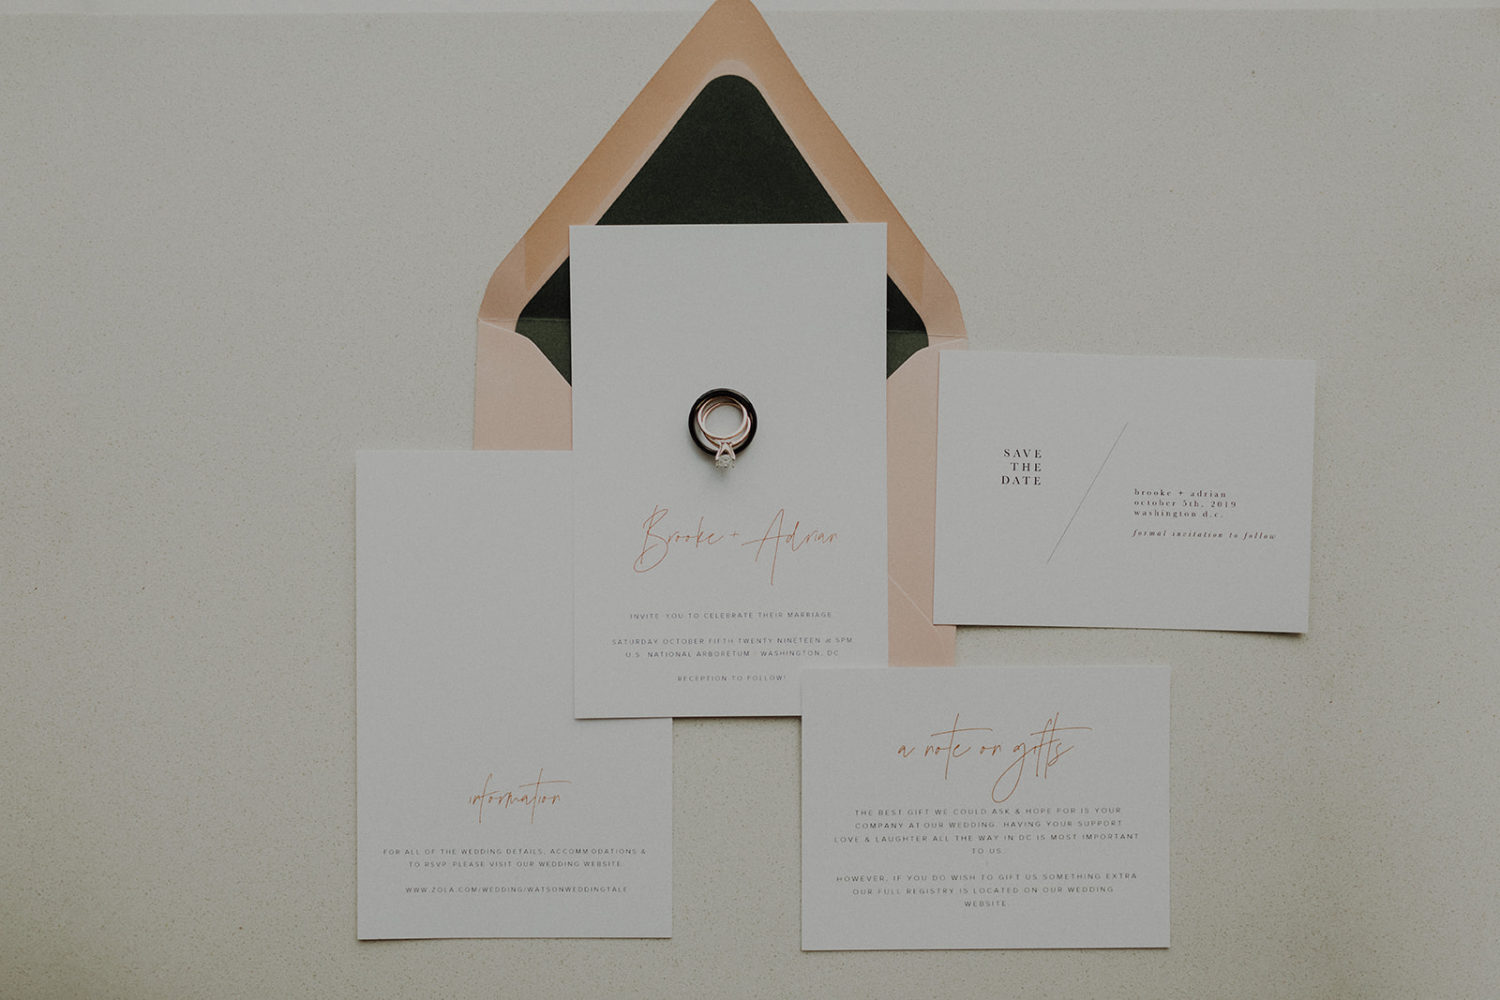 Wedding invitation suite with wedding rings as part of tips for how to plan a wedding on a budget